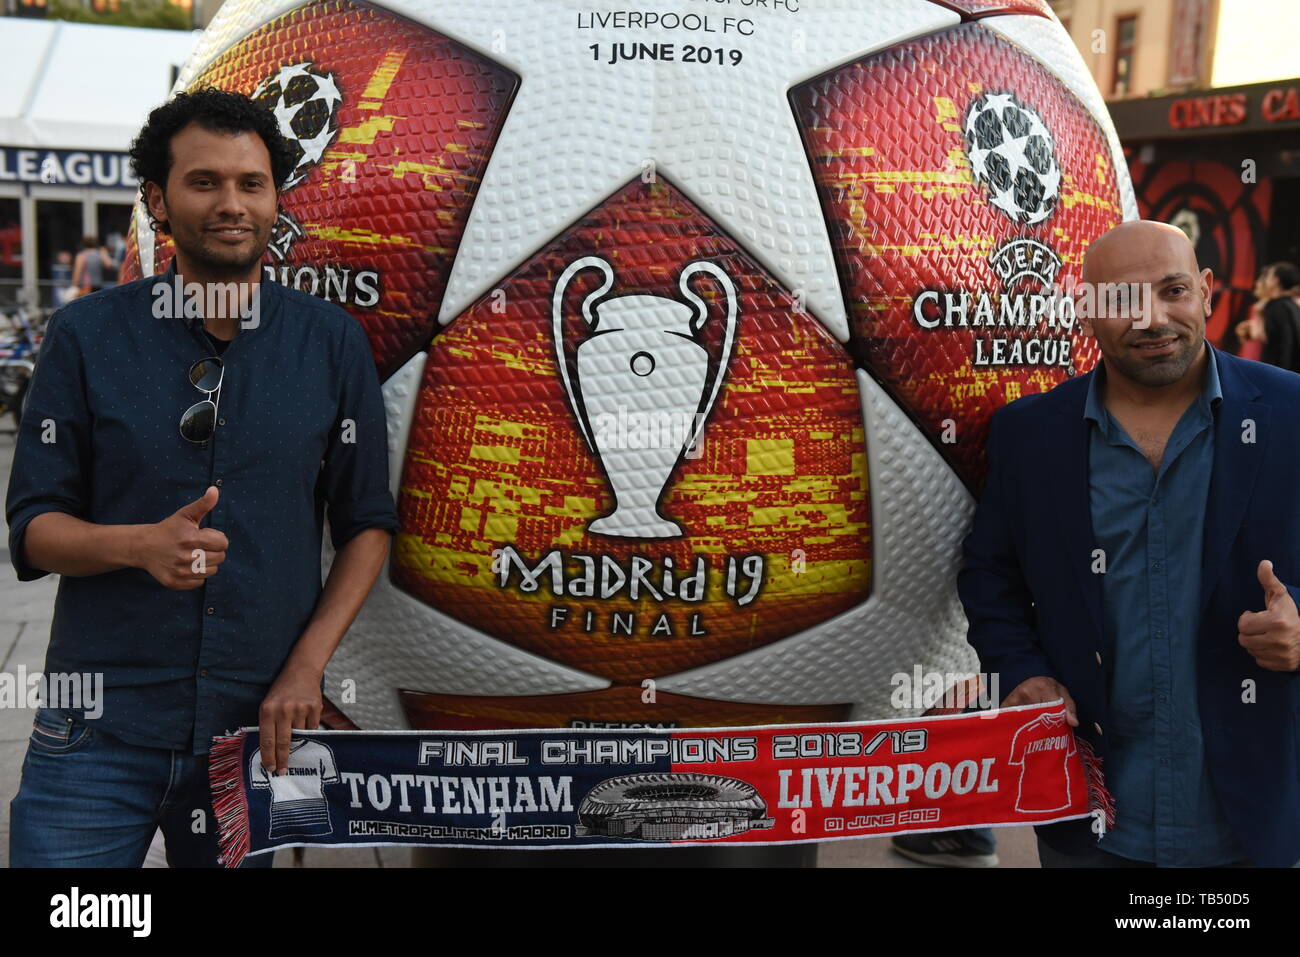 Two men are seen posing for a picture with an advertisement of the 2019 Champions League Final in Madrid. Madrid will host the UEFA Champions League final between Liverpool FC and Tottenham Hotspur on June 1, 2019 at the Wanda Metropolitano Stadium. Stock Photo